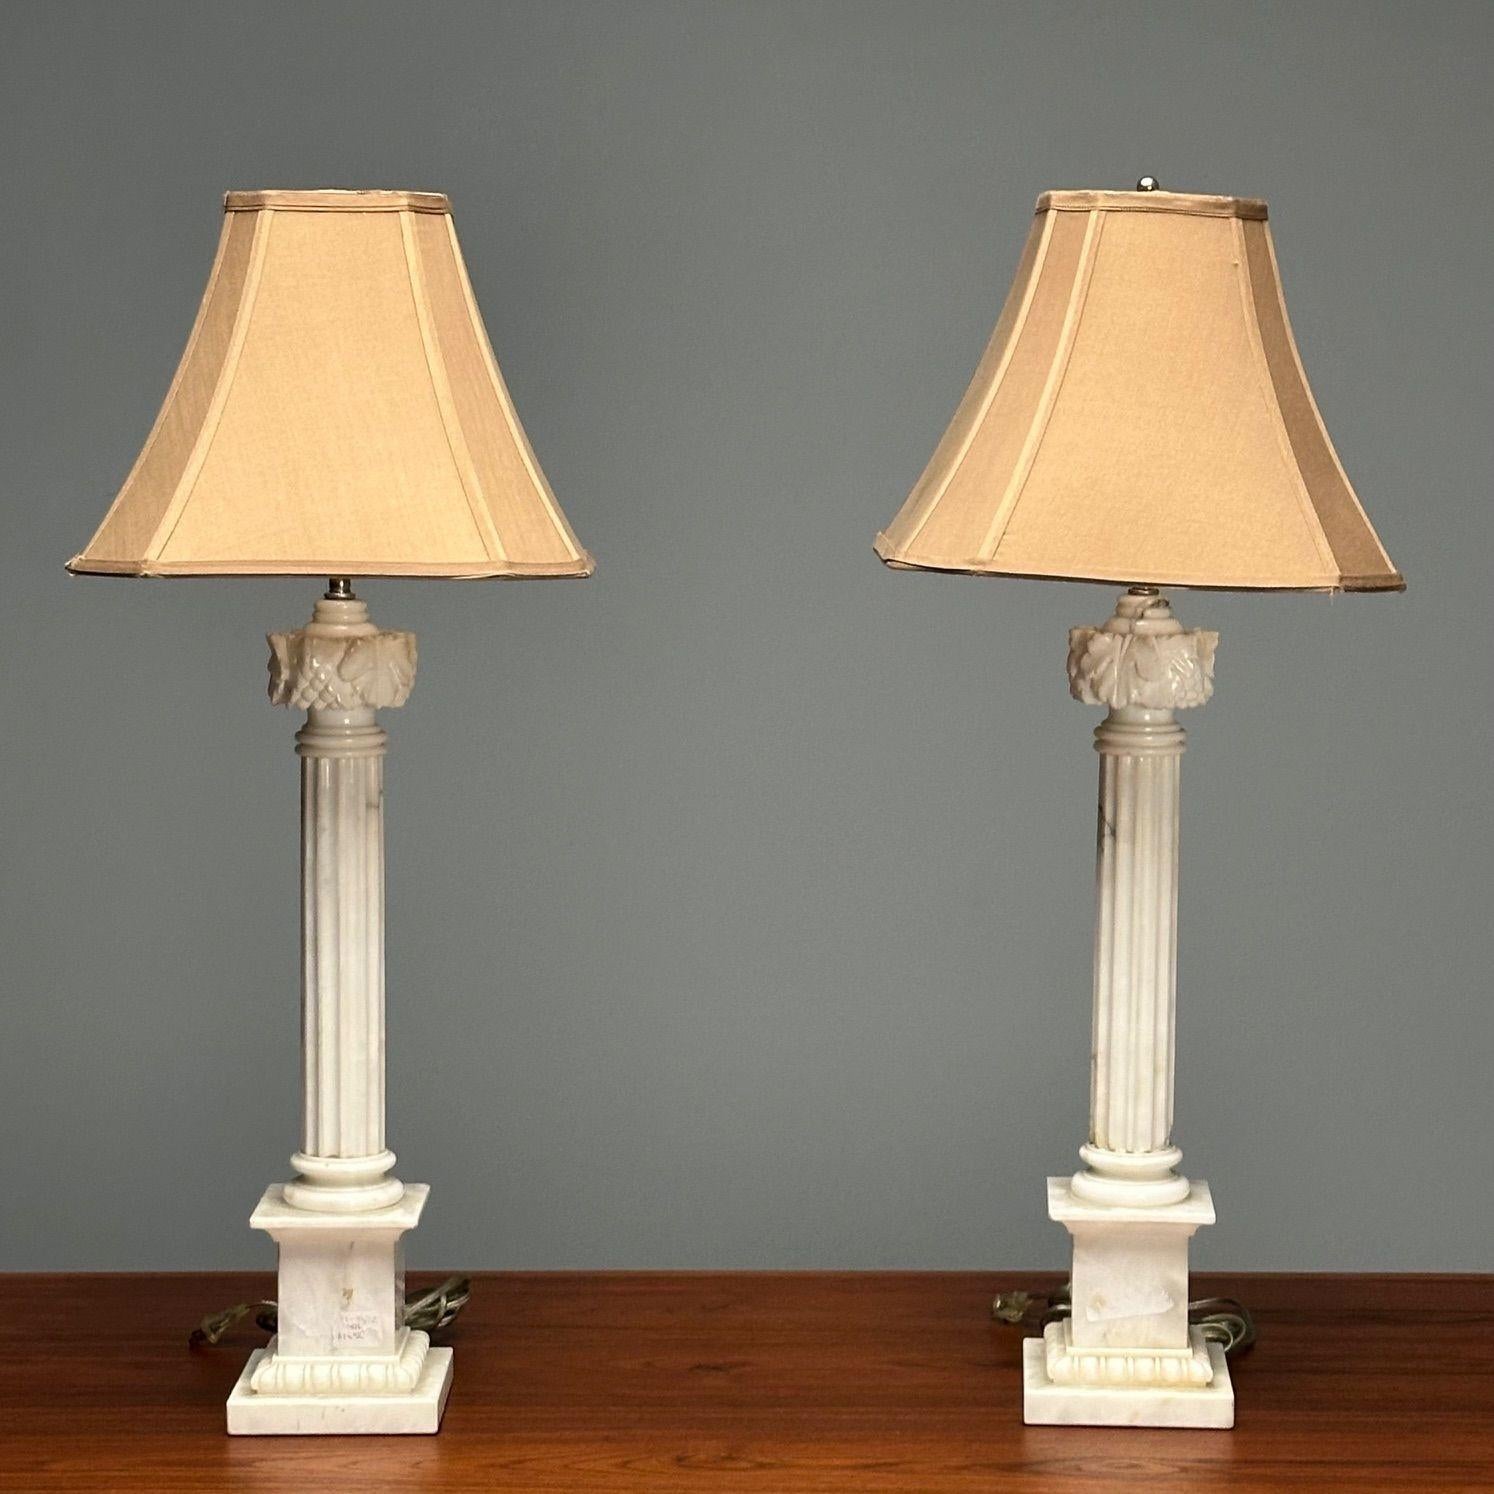 Italian Neoclassical, Column Motif Table Lamps, Marble, Italy, 1950s For Sale 1